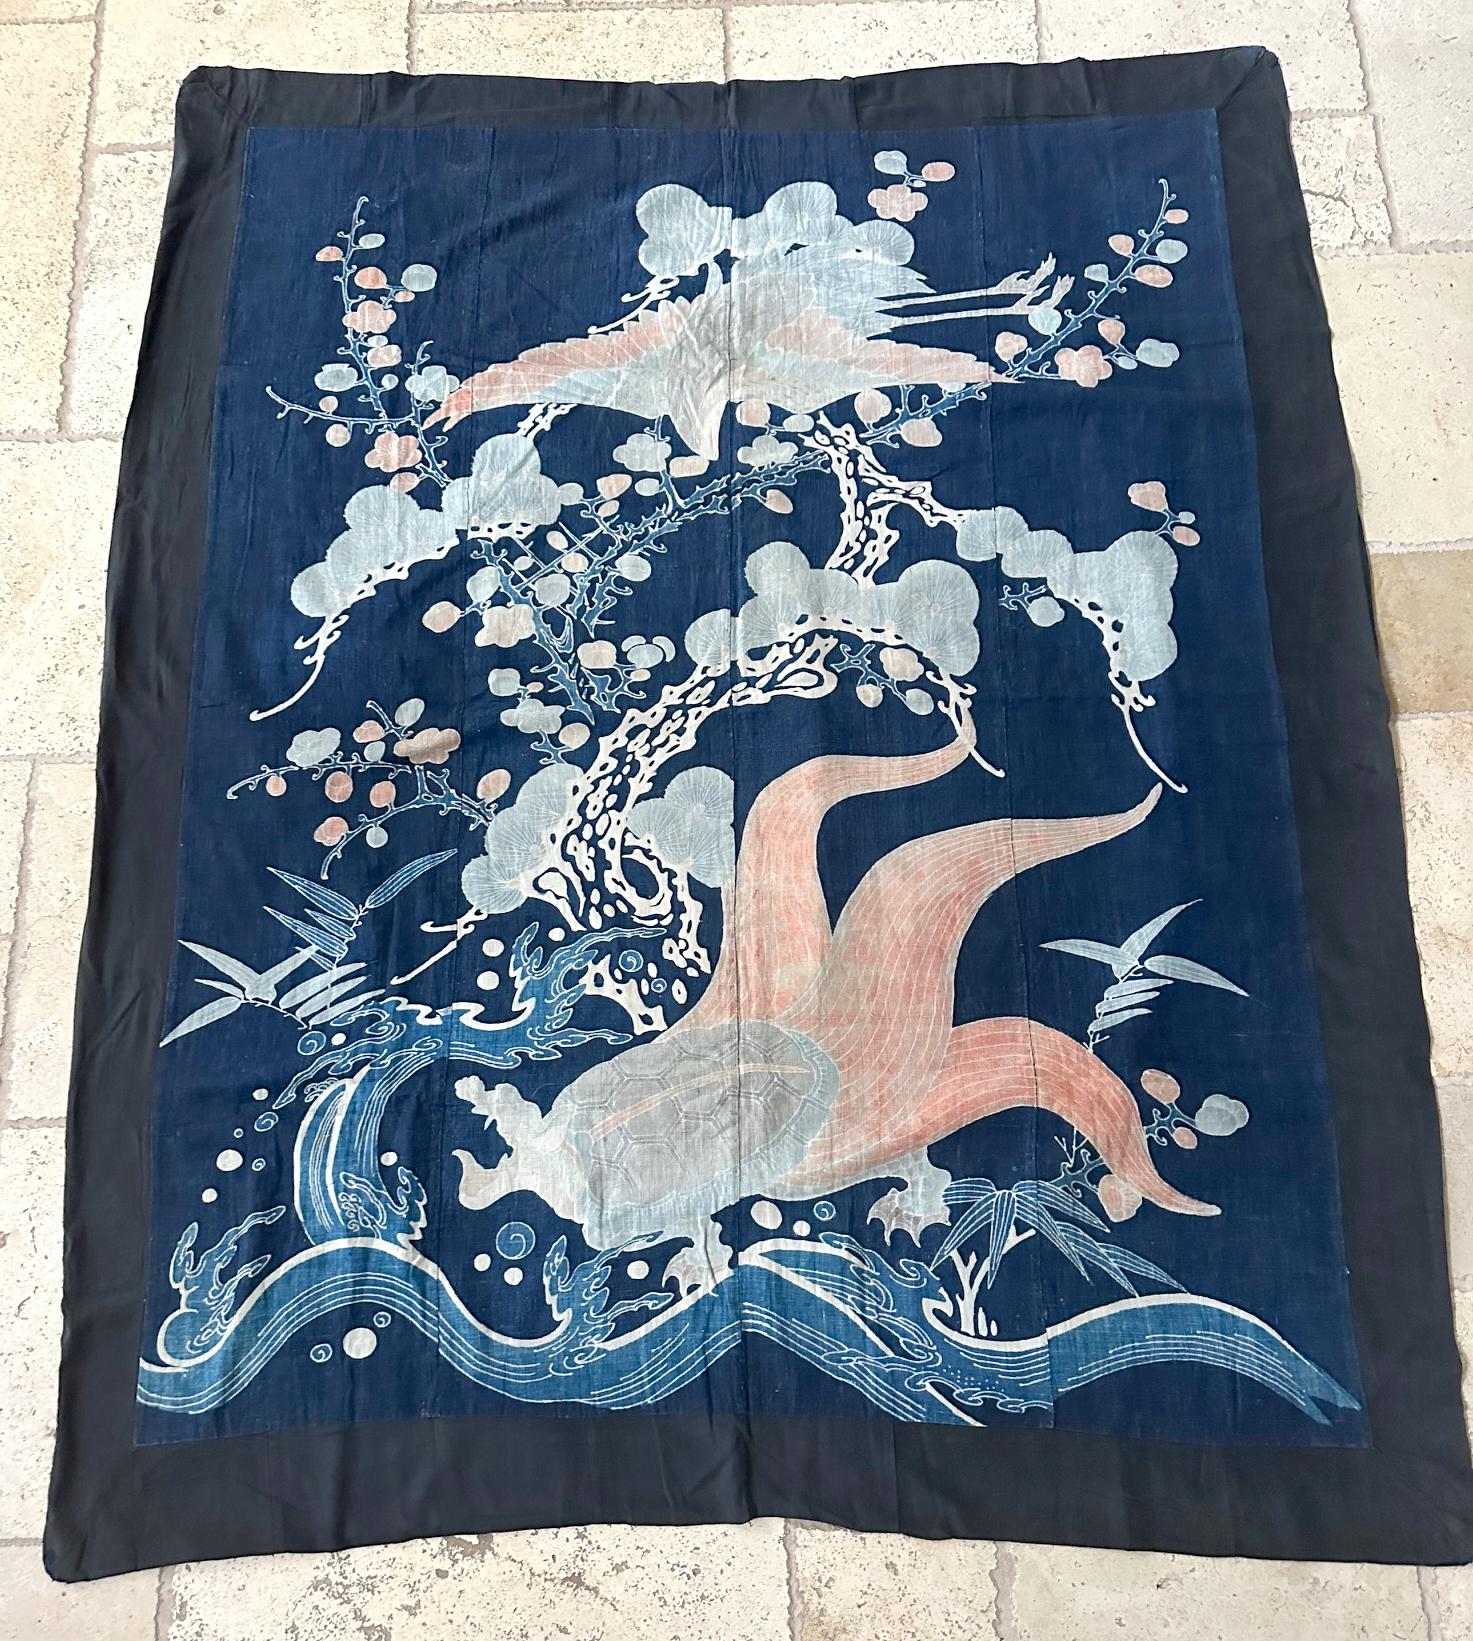 A large unframed Japanese Futonji textile art circa late 19th century toward the end of the Meiji period. Seamed together from four vertical sections of cotton in deep indigo color, this large piece was made as a Futonji (futon cover) or Yutan